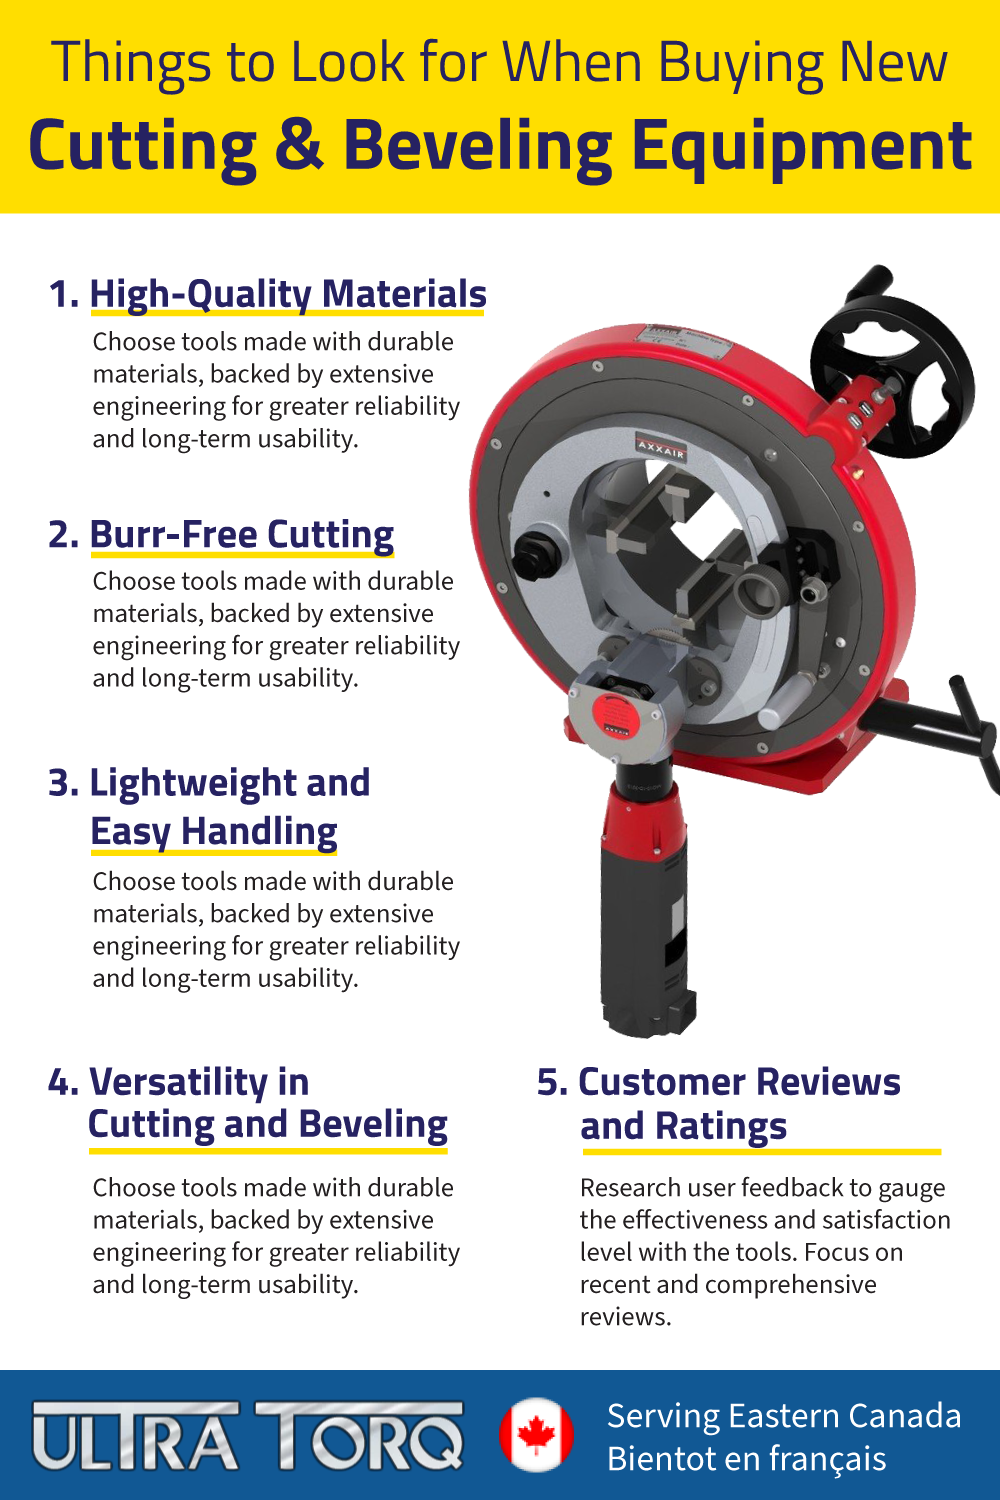 5 Things To Look For In New Orbital Cutting and Beveling Tools Infographic